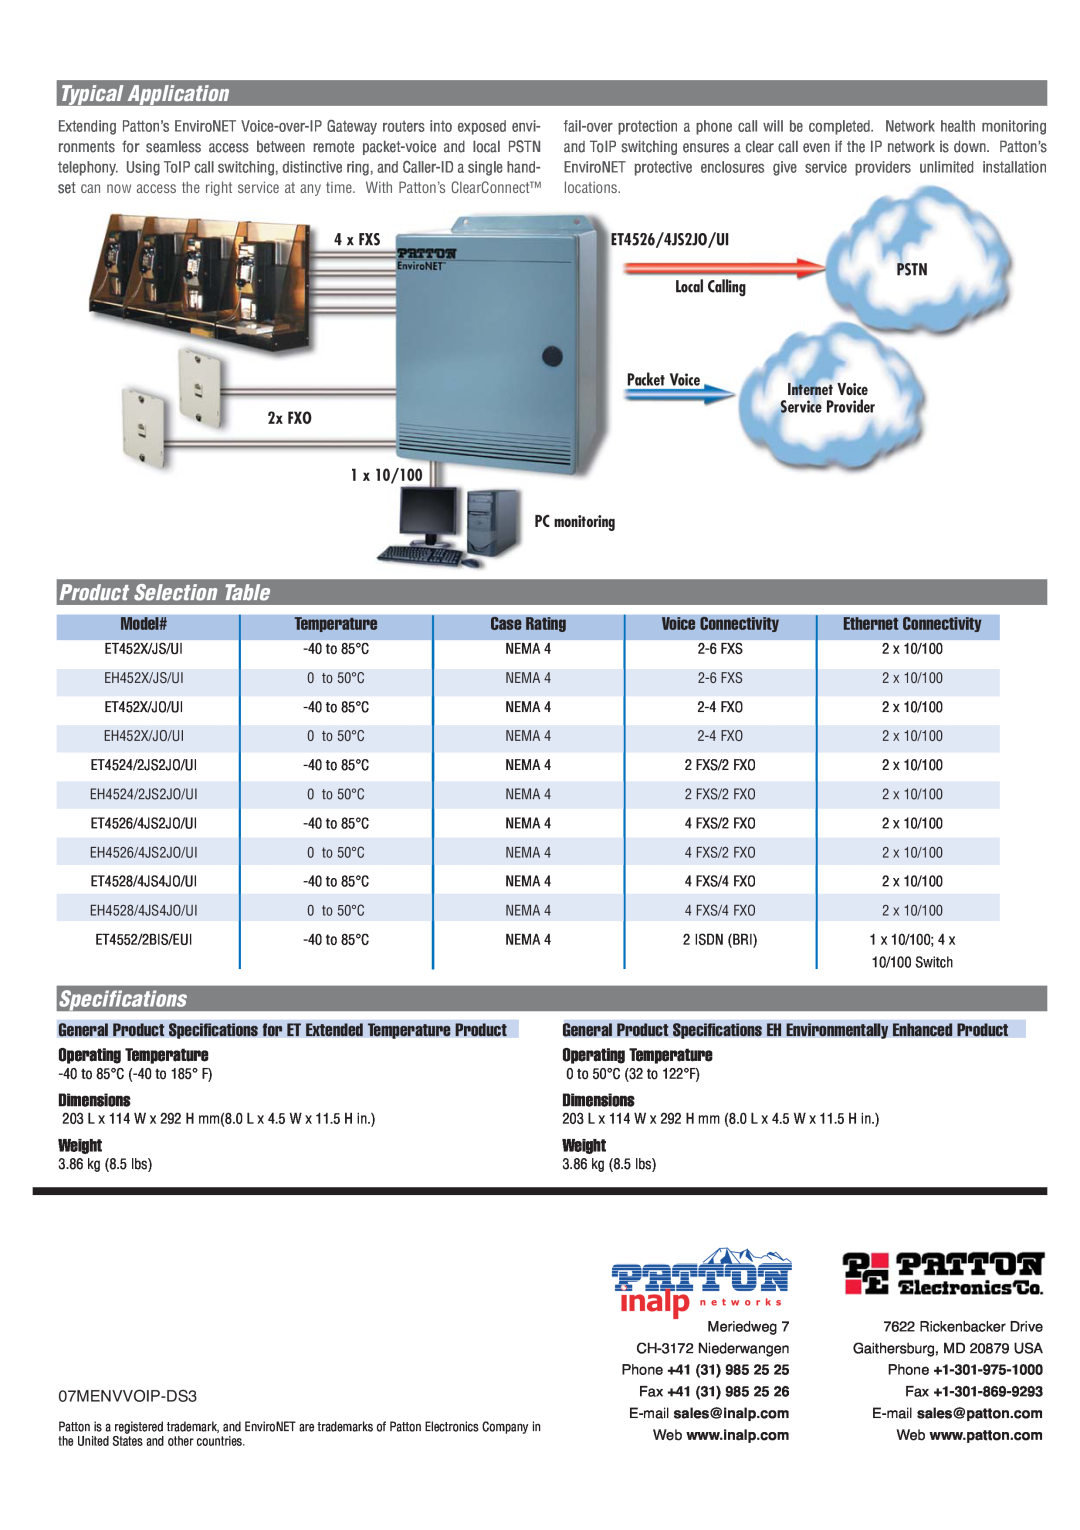 Patton electronic ET4500 series Typical Application, Product Selection Table, Specifications, x FXS, PSTN Local Calling 